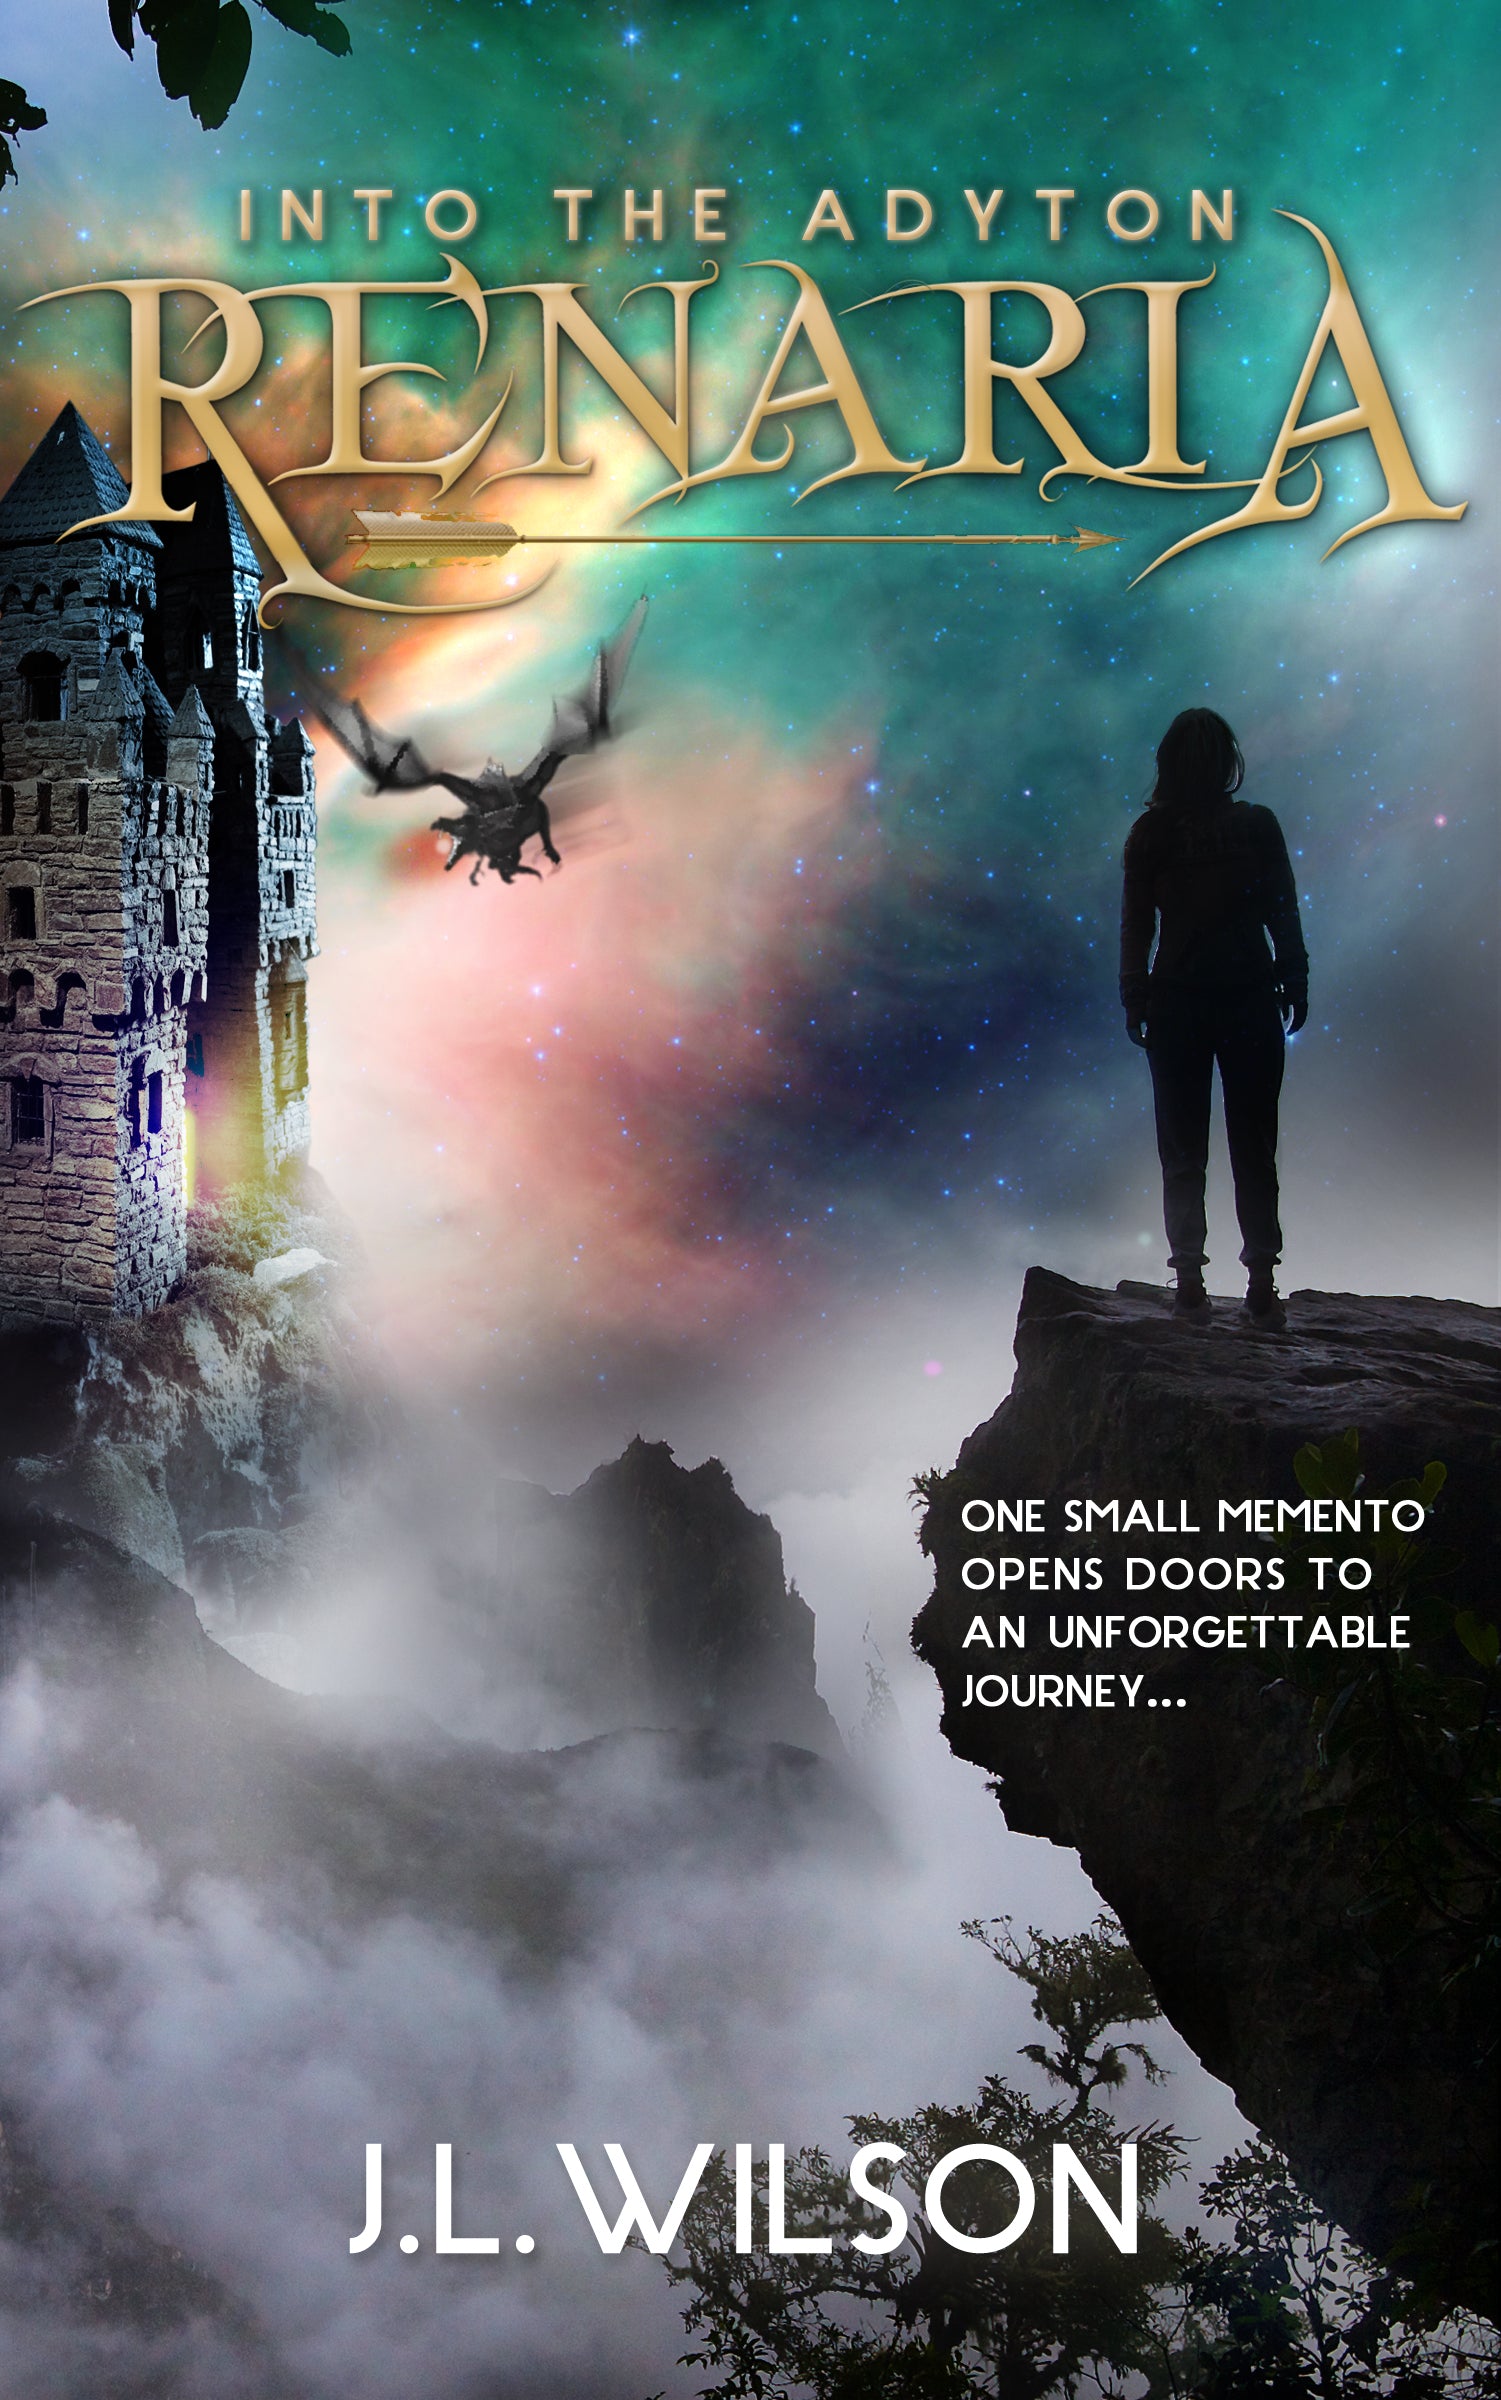 Book Review: Renaria--Into the Adyton by J.L. Wilson